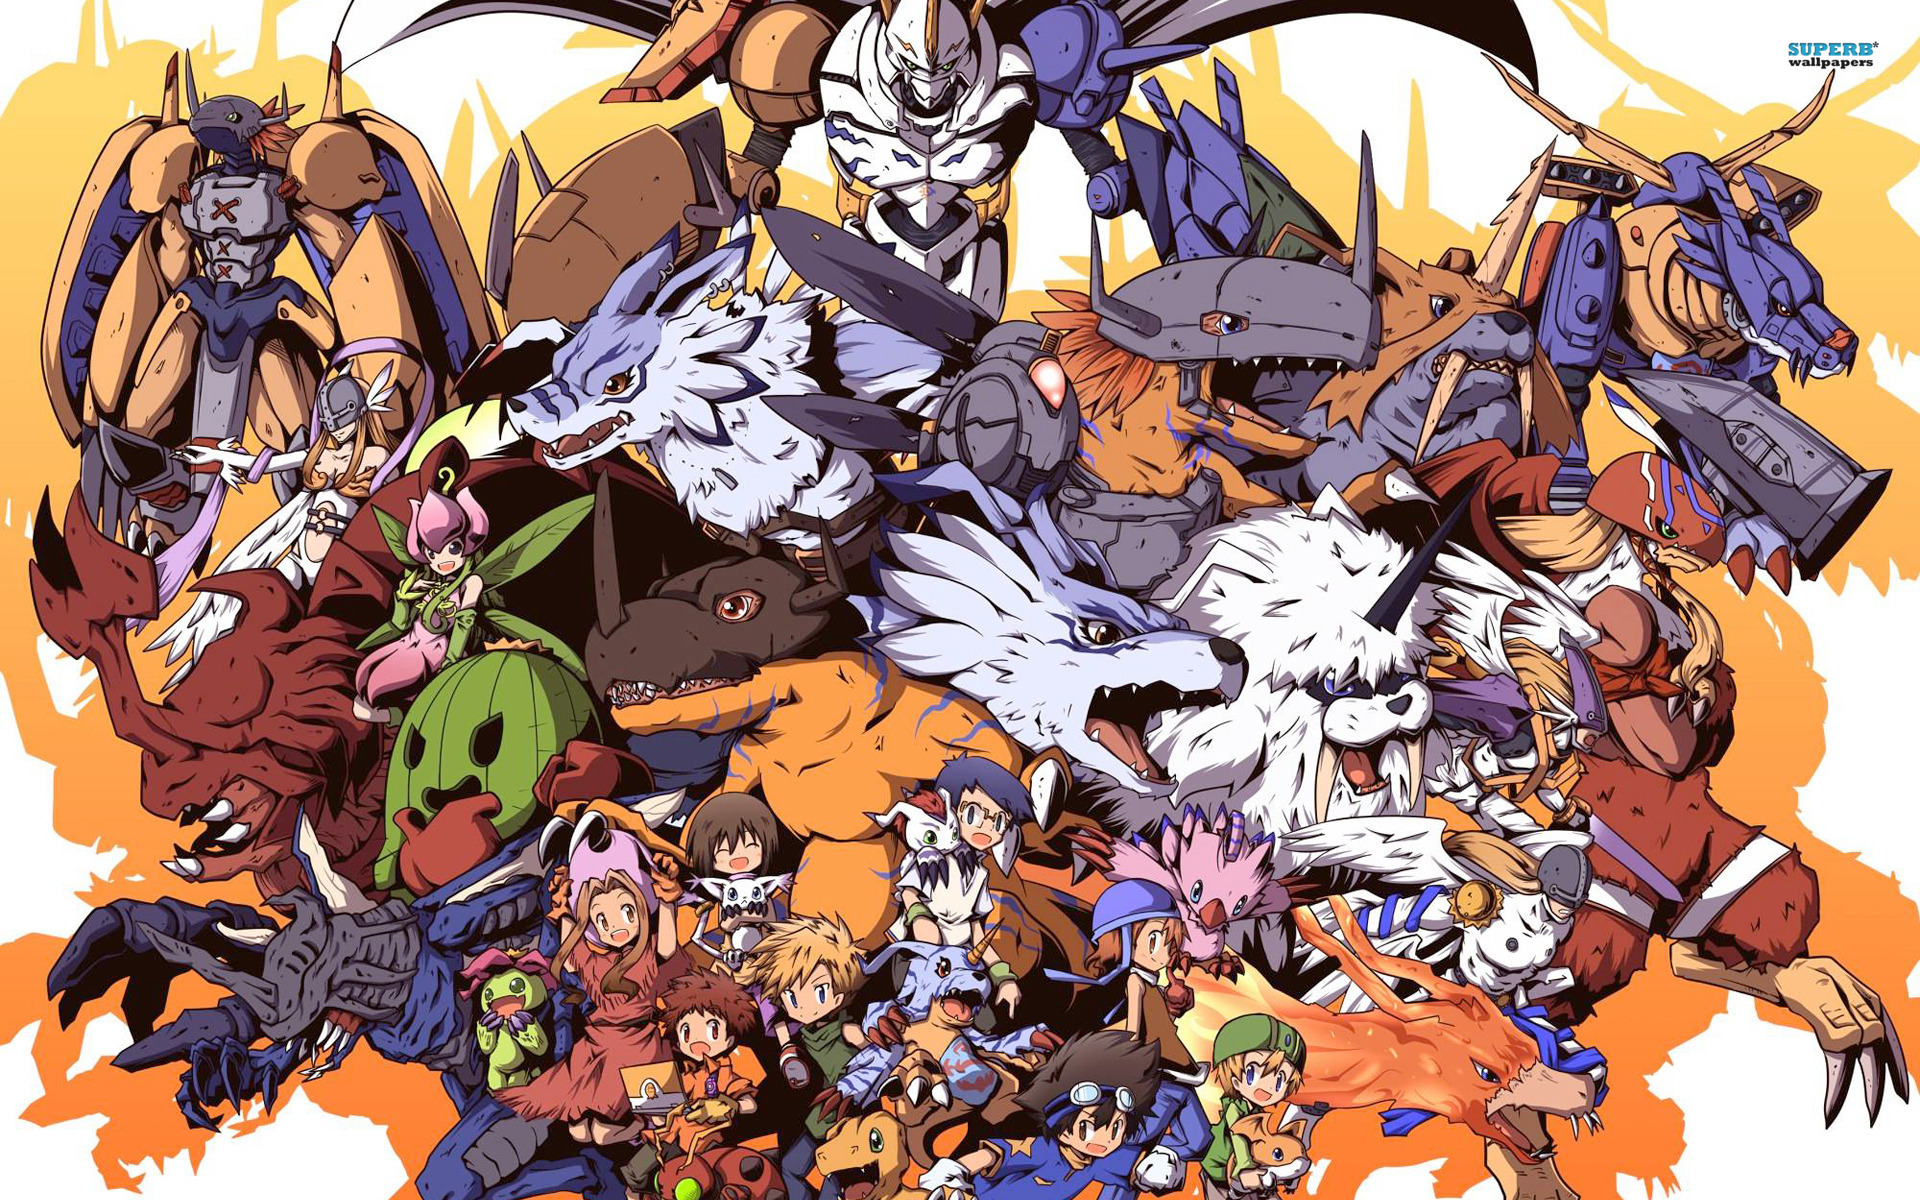 Free Download Day 22 Is There A Digimon Wallpaper On Your Computer Unfortunately No 19x10 For Your Desktop Mobile Tablet Explore 45 Digimon Tri Wallpaper Cool Digimon Wallpaper